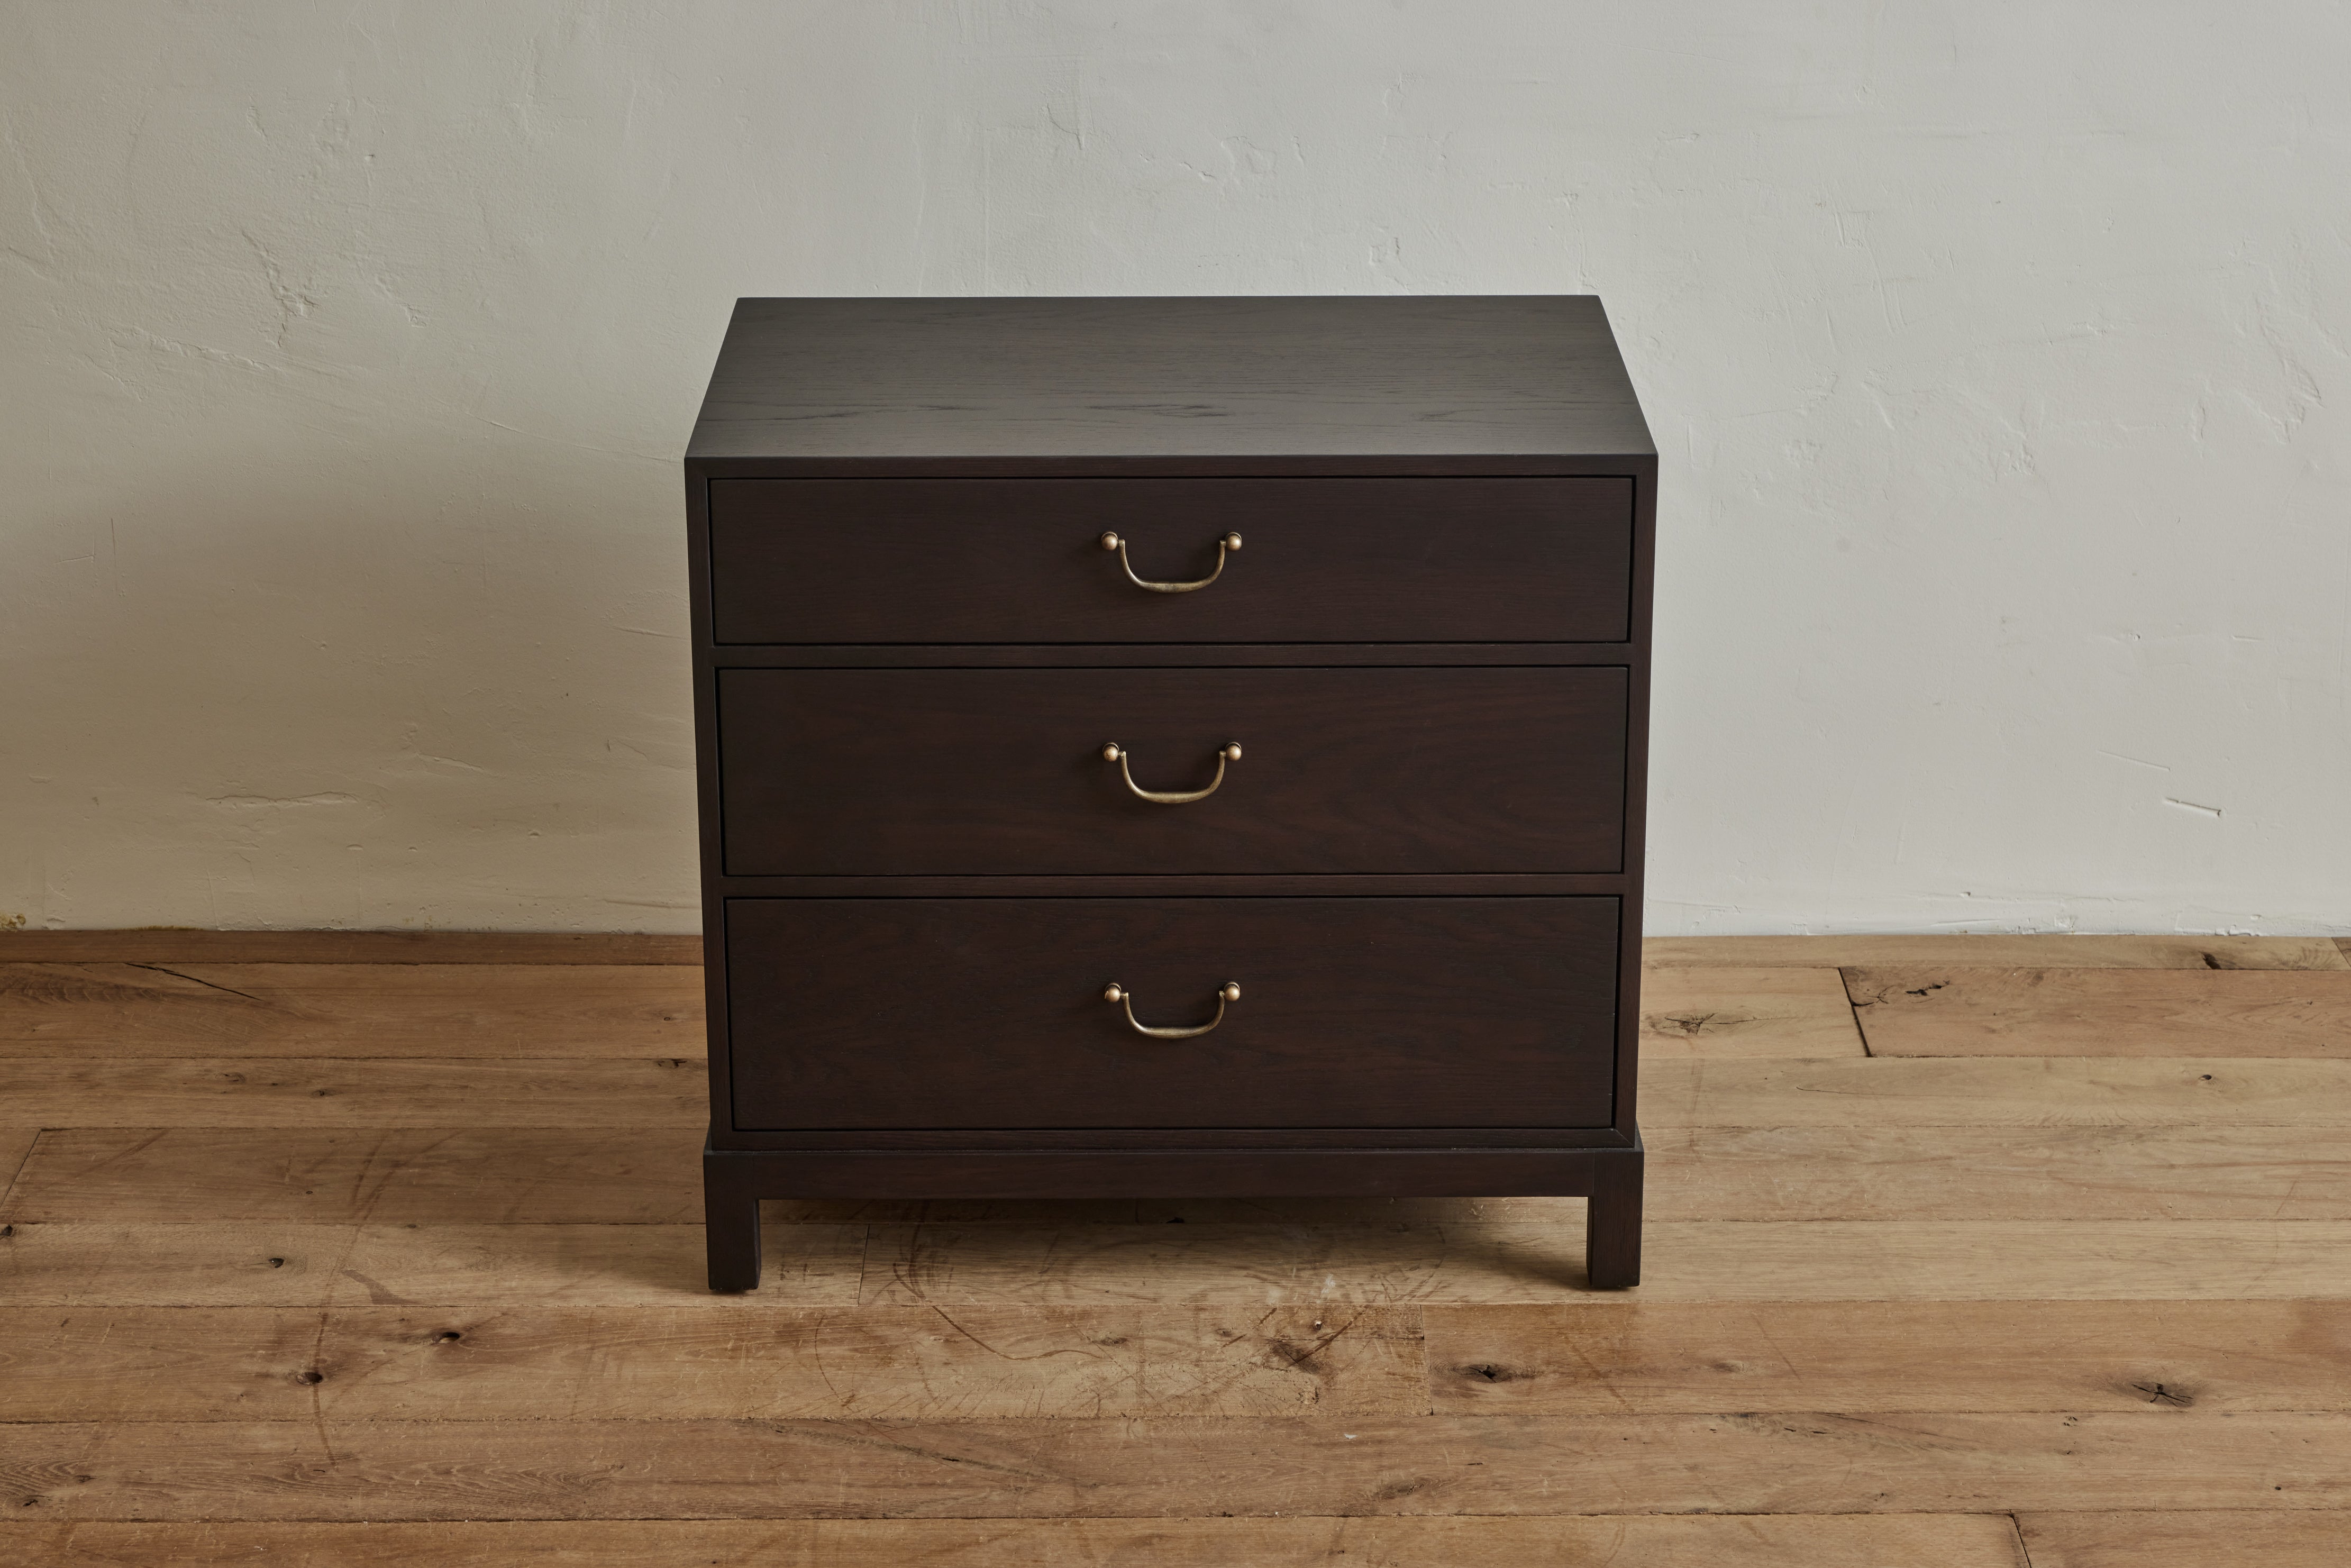 Nickey Kehoe 28" Campaign Chest - In Stock